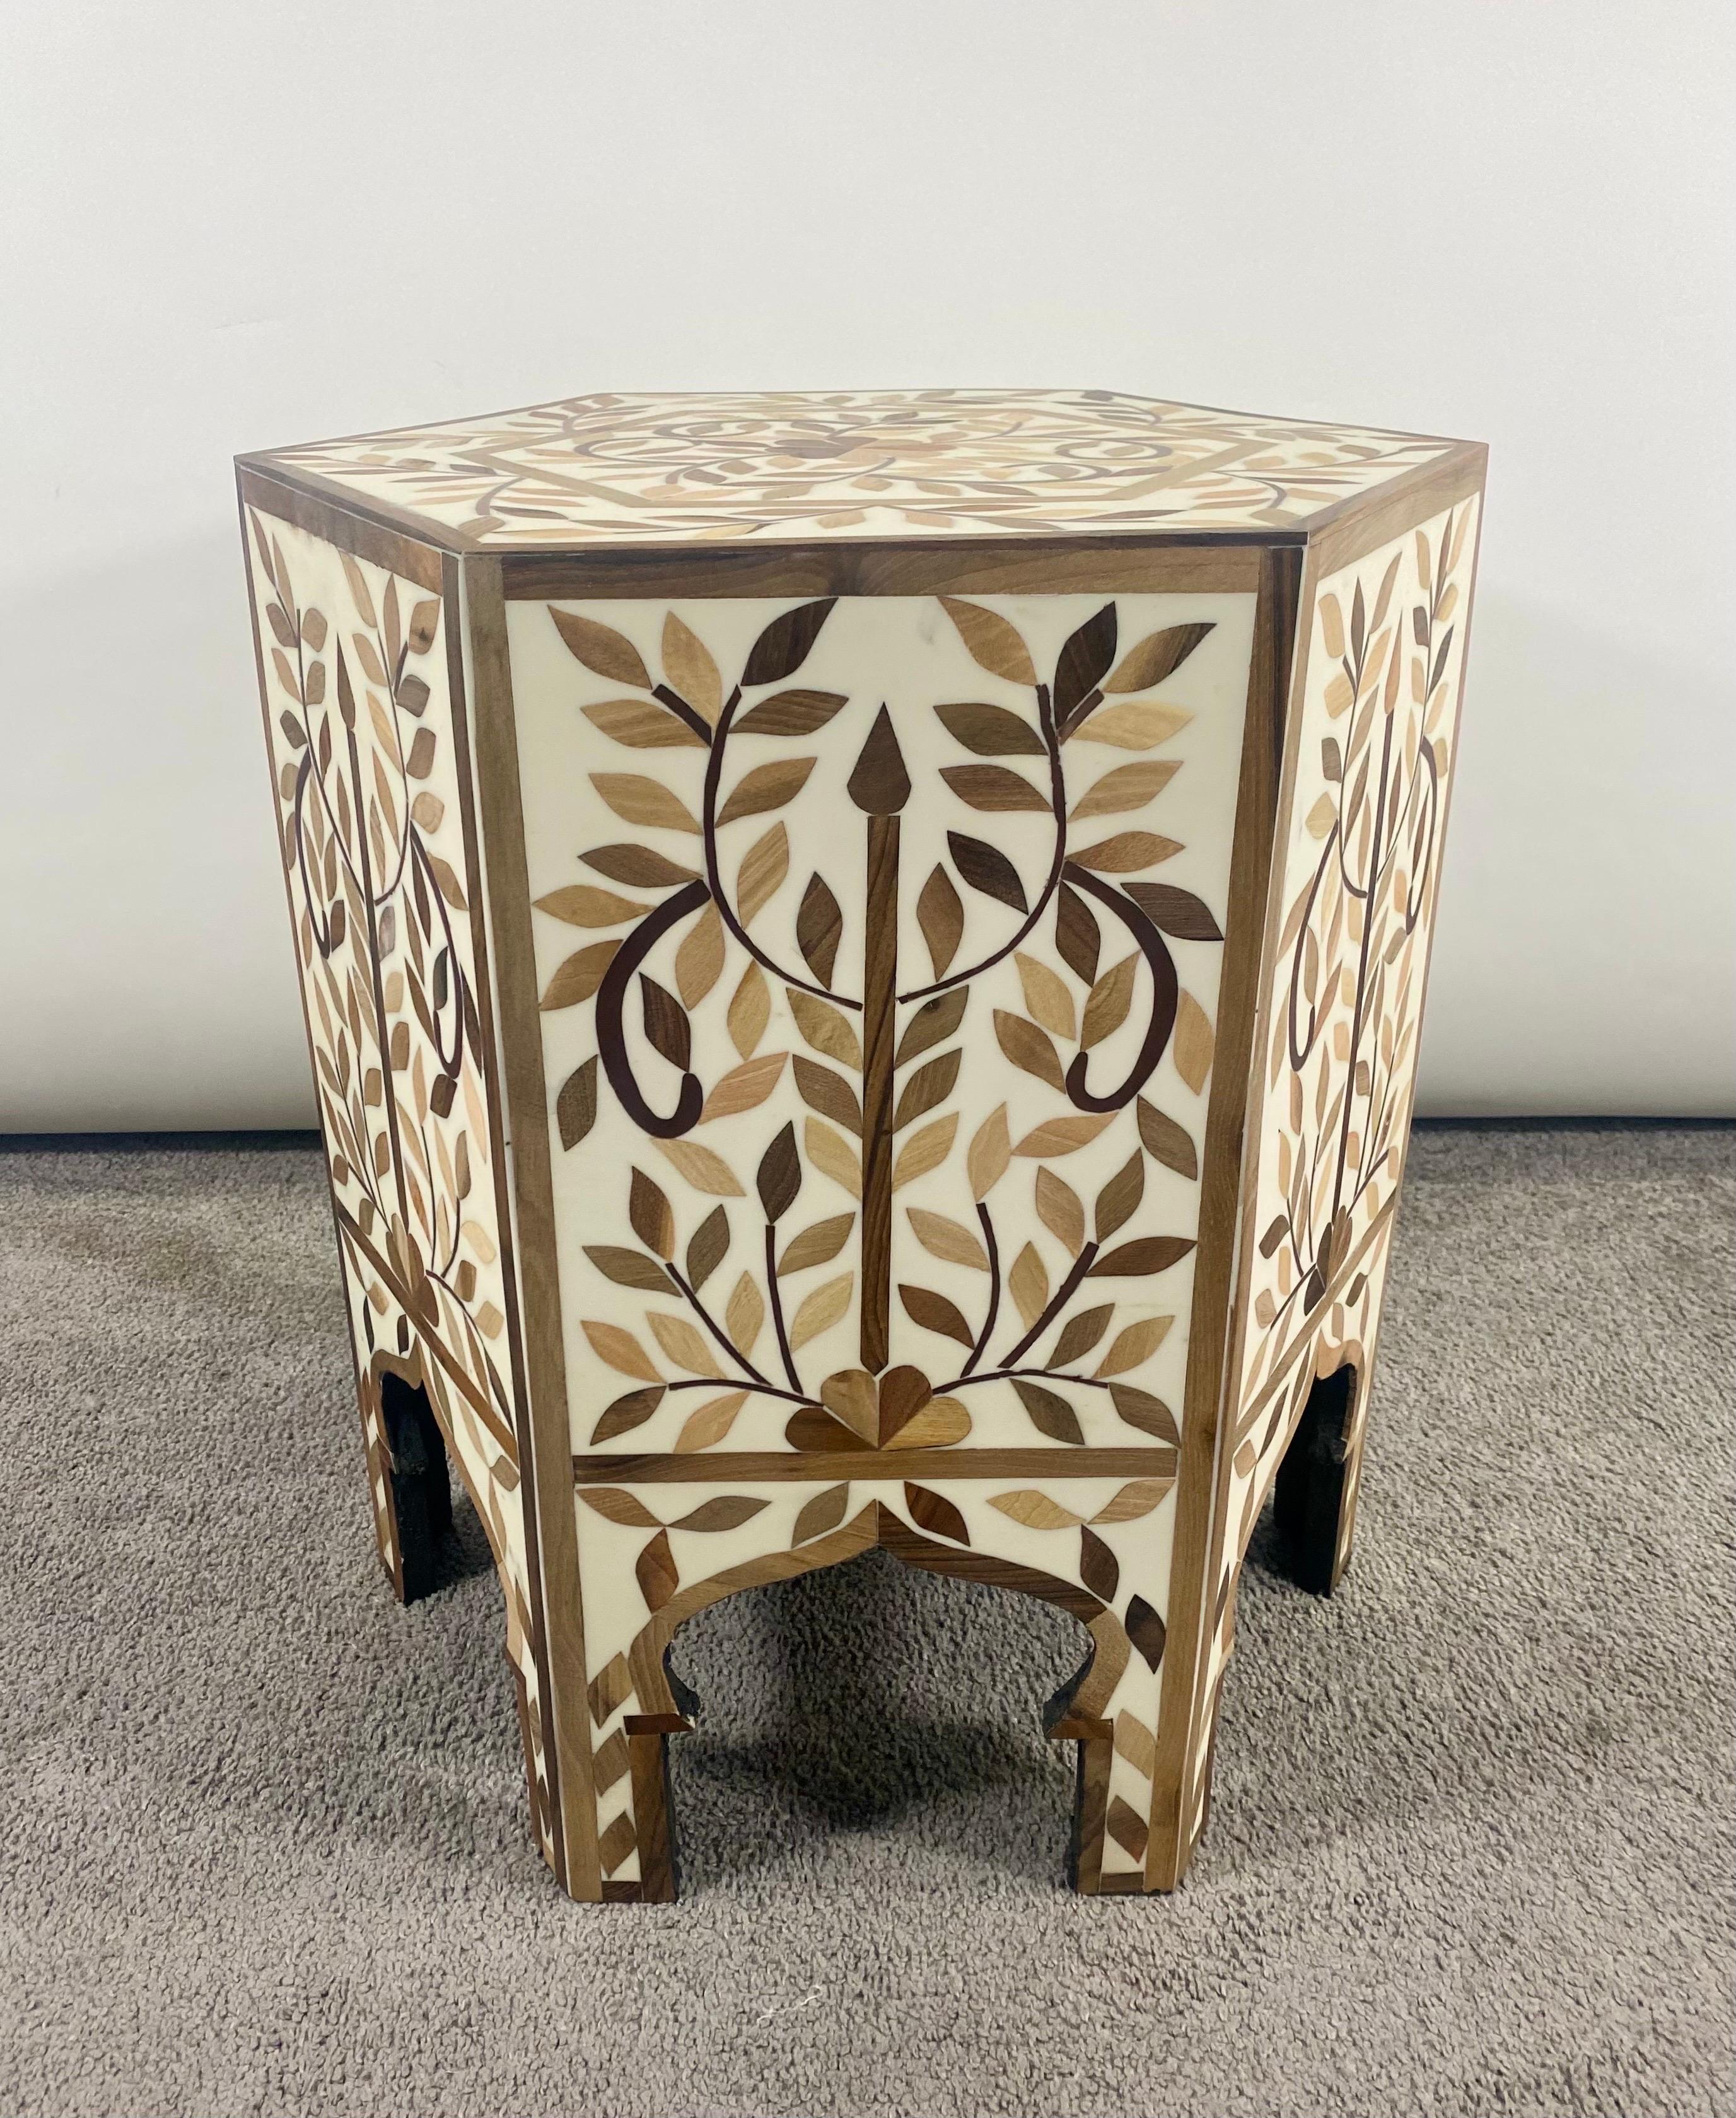 Hand-Carved Moroccan Boho Chic Leaf Design Resin & Walnut Hexagonal Side or End Table, Pair For Sale